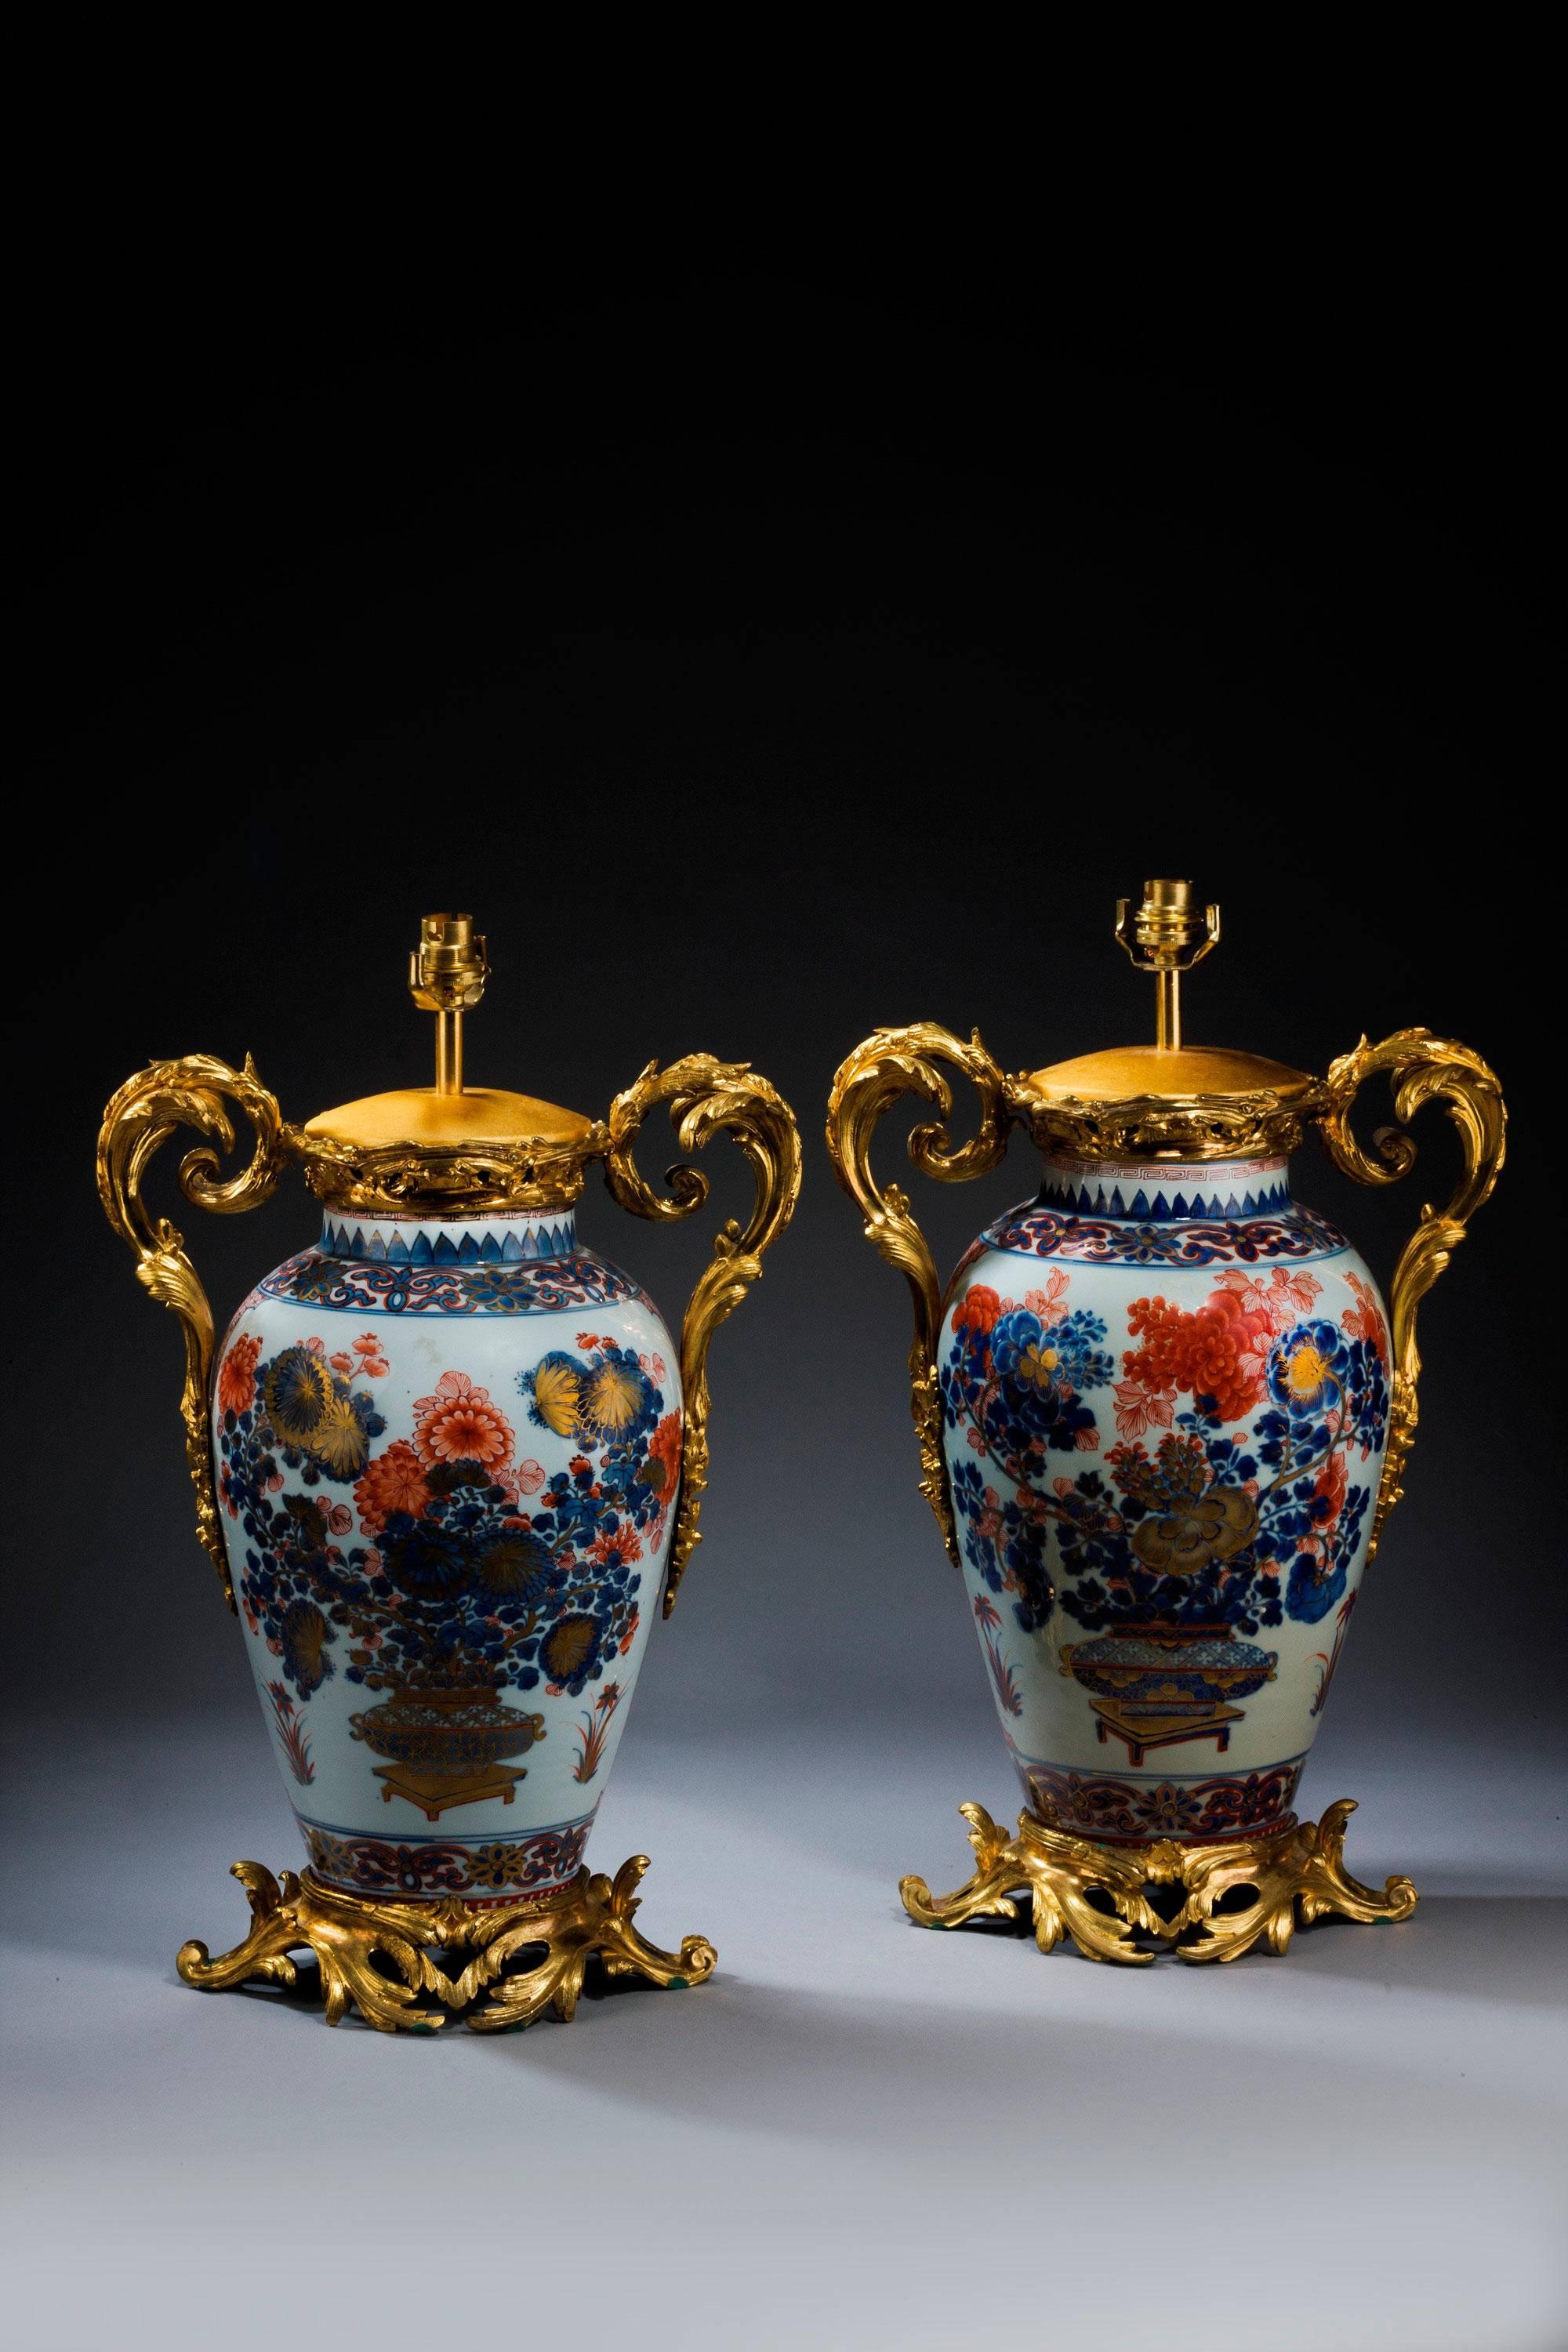 Exceptional pair of Samson of Paris 19th century oriental ovoid vase lamps of the finest quality in the 18th century oriental style. Finely chiseled gilt bronze Rococo handles and bases. 

Shades are not included in the price of our lamps. We do